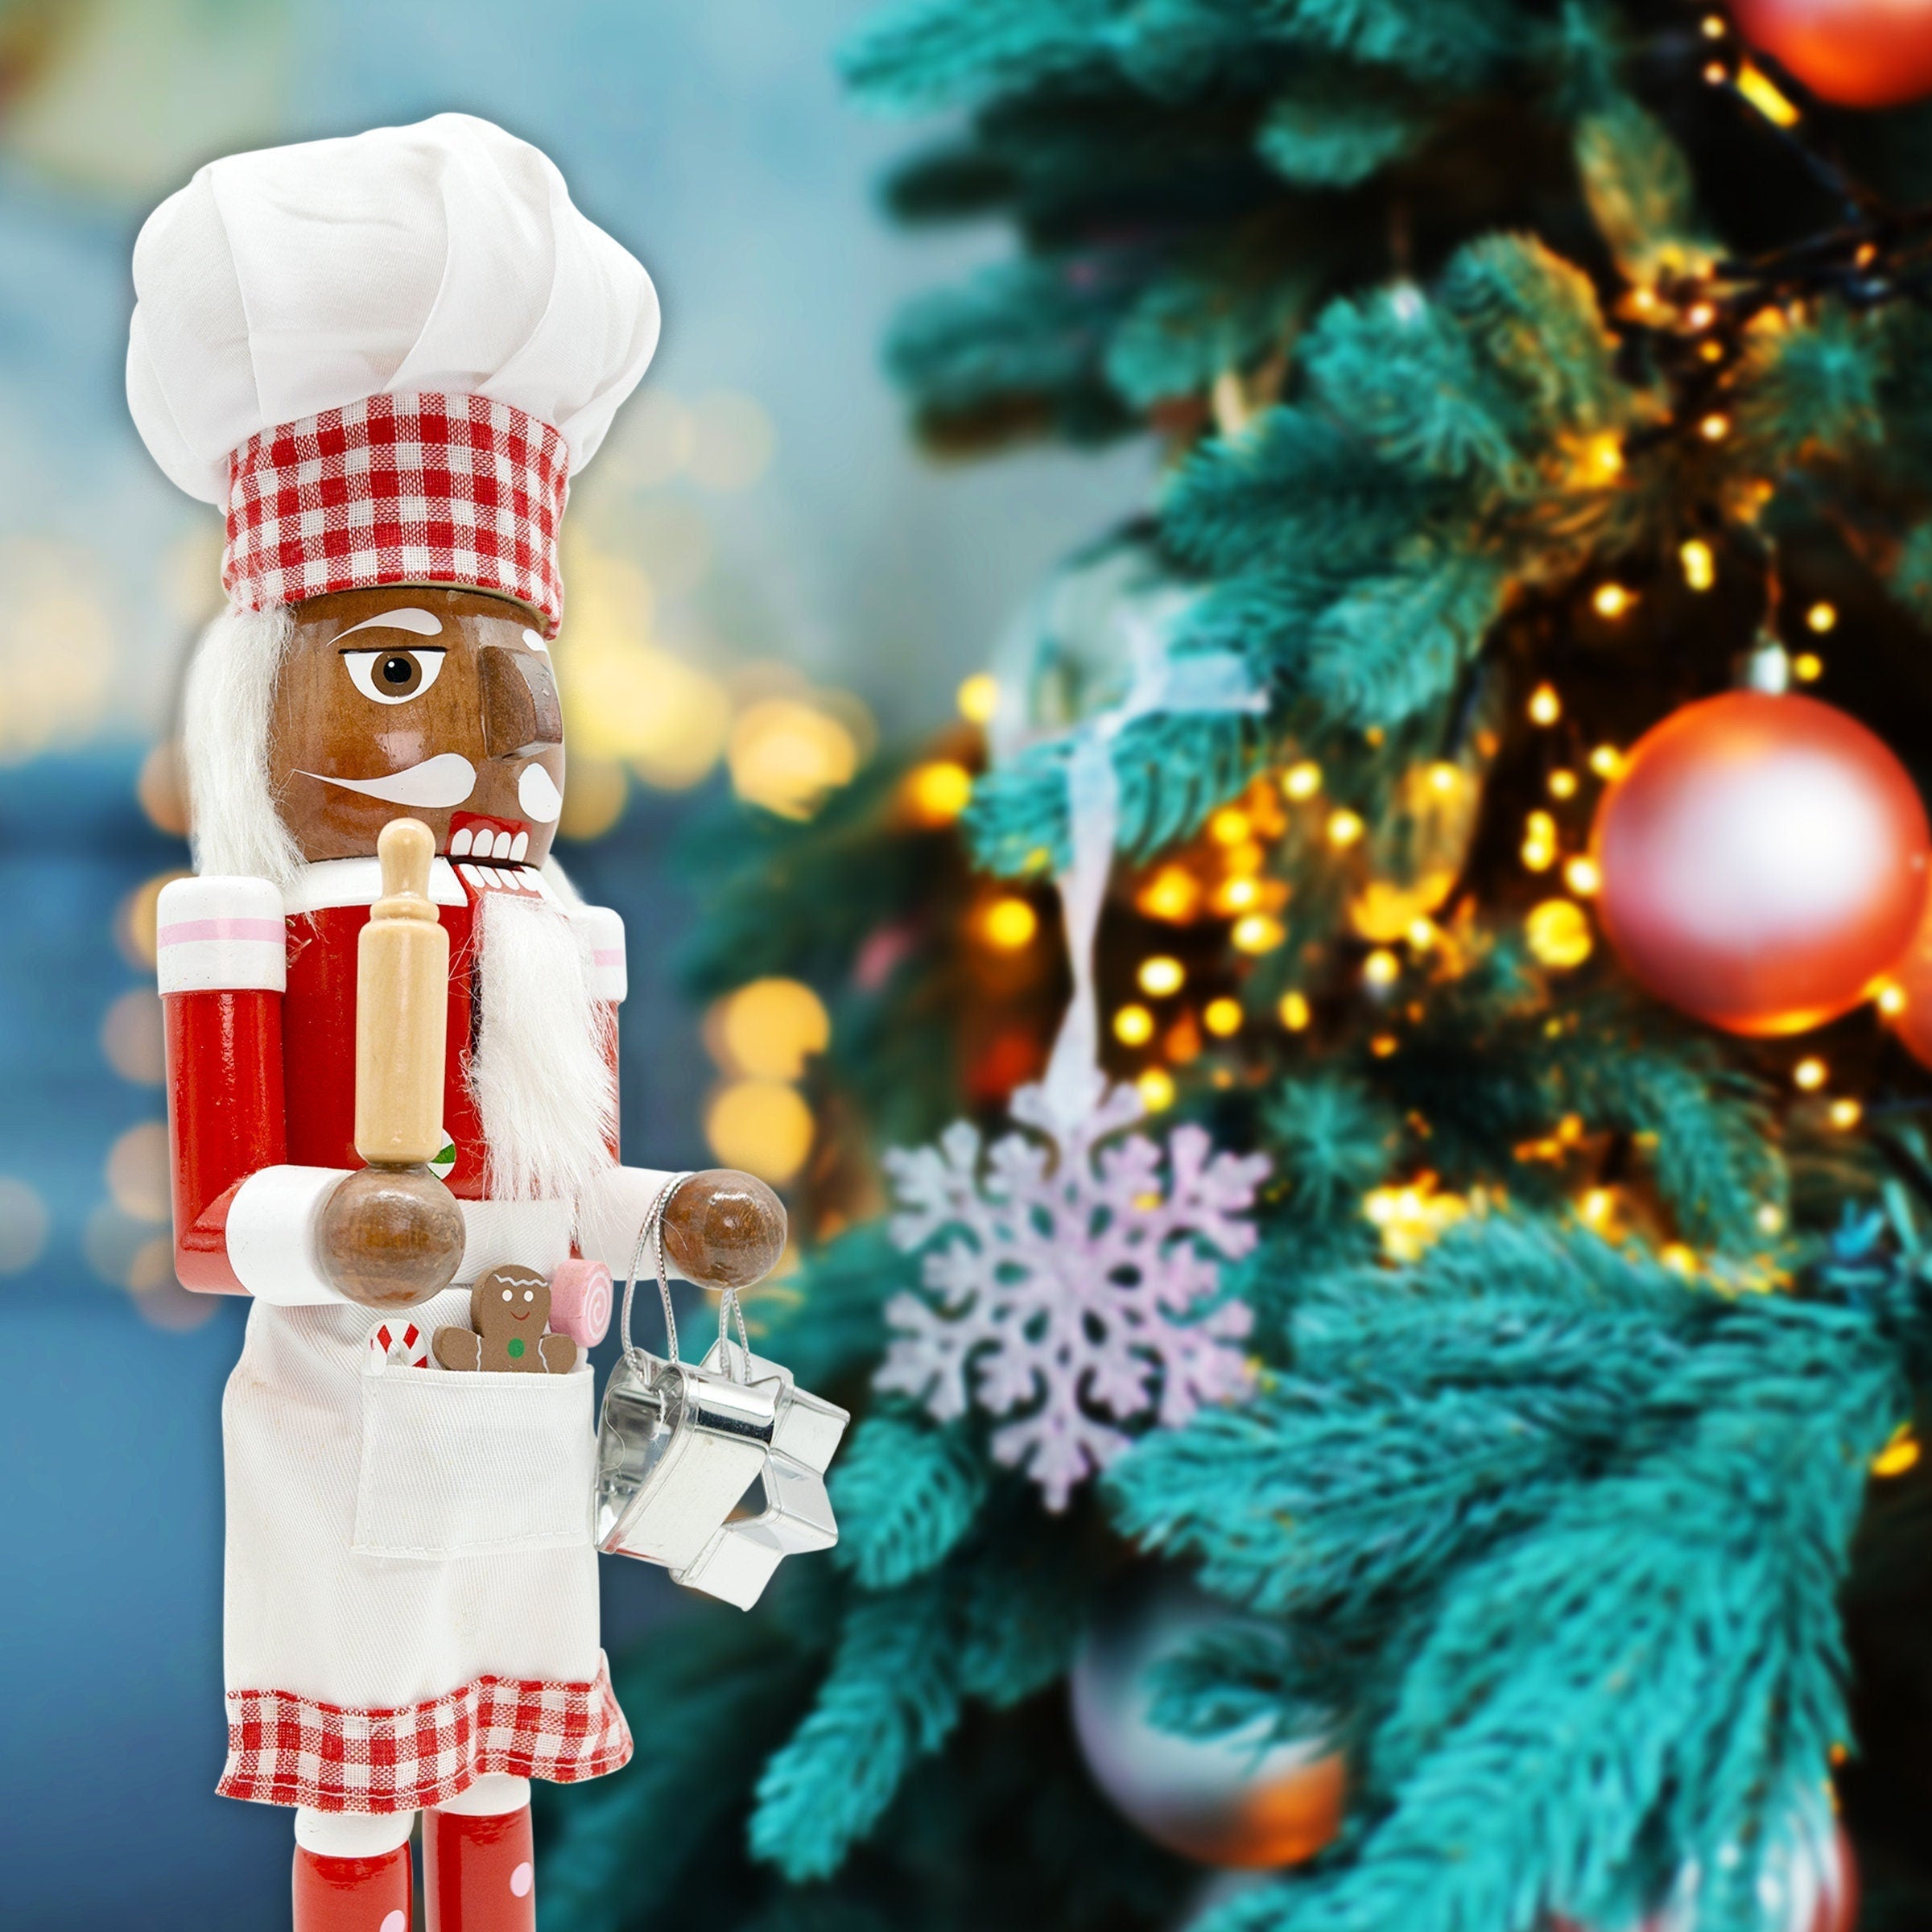 14-inch-Wooden-Nutcrackers-(Red-Baker-Chef)Christmas-Decoration-Figures-Nutcrackers